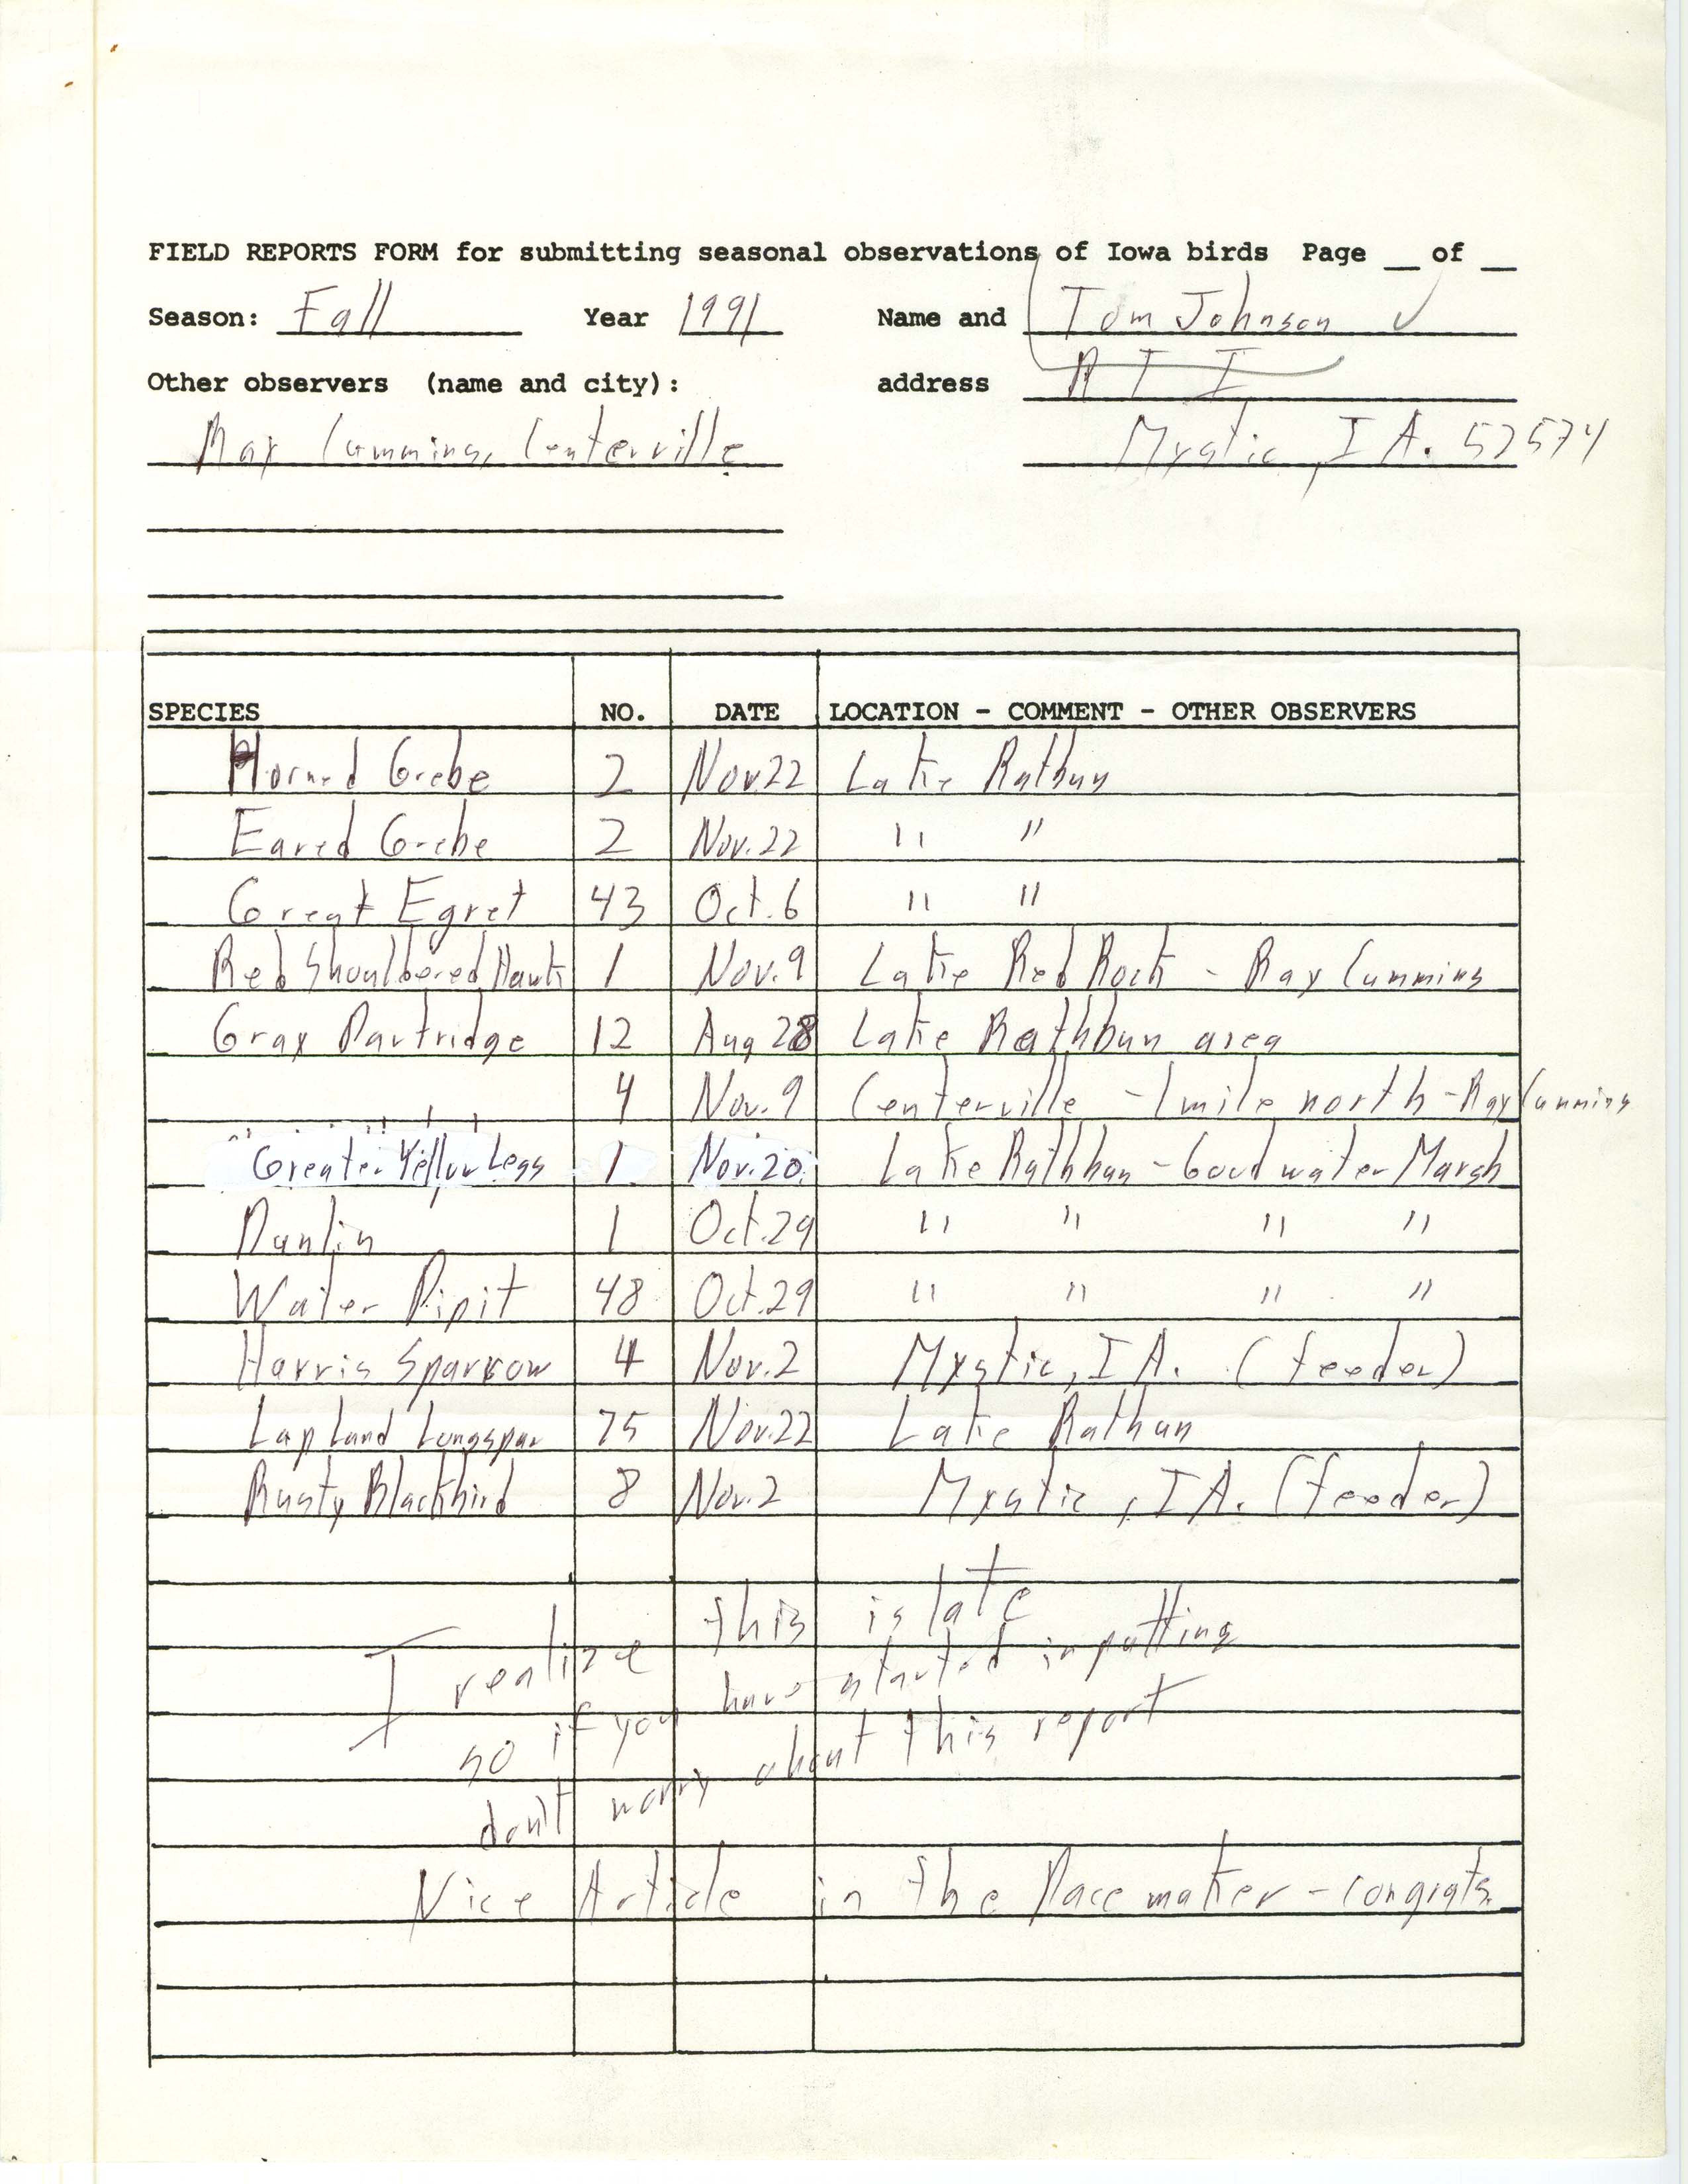 Field reports form for submitting seasonal observations of Iowa birds, Tom Johnson, fall 1991